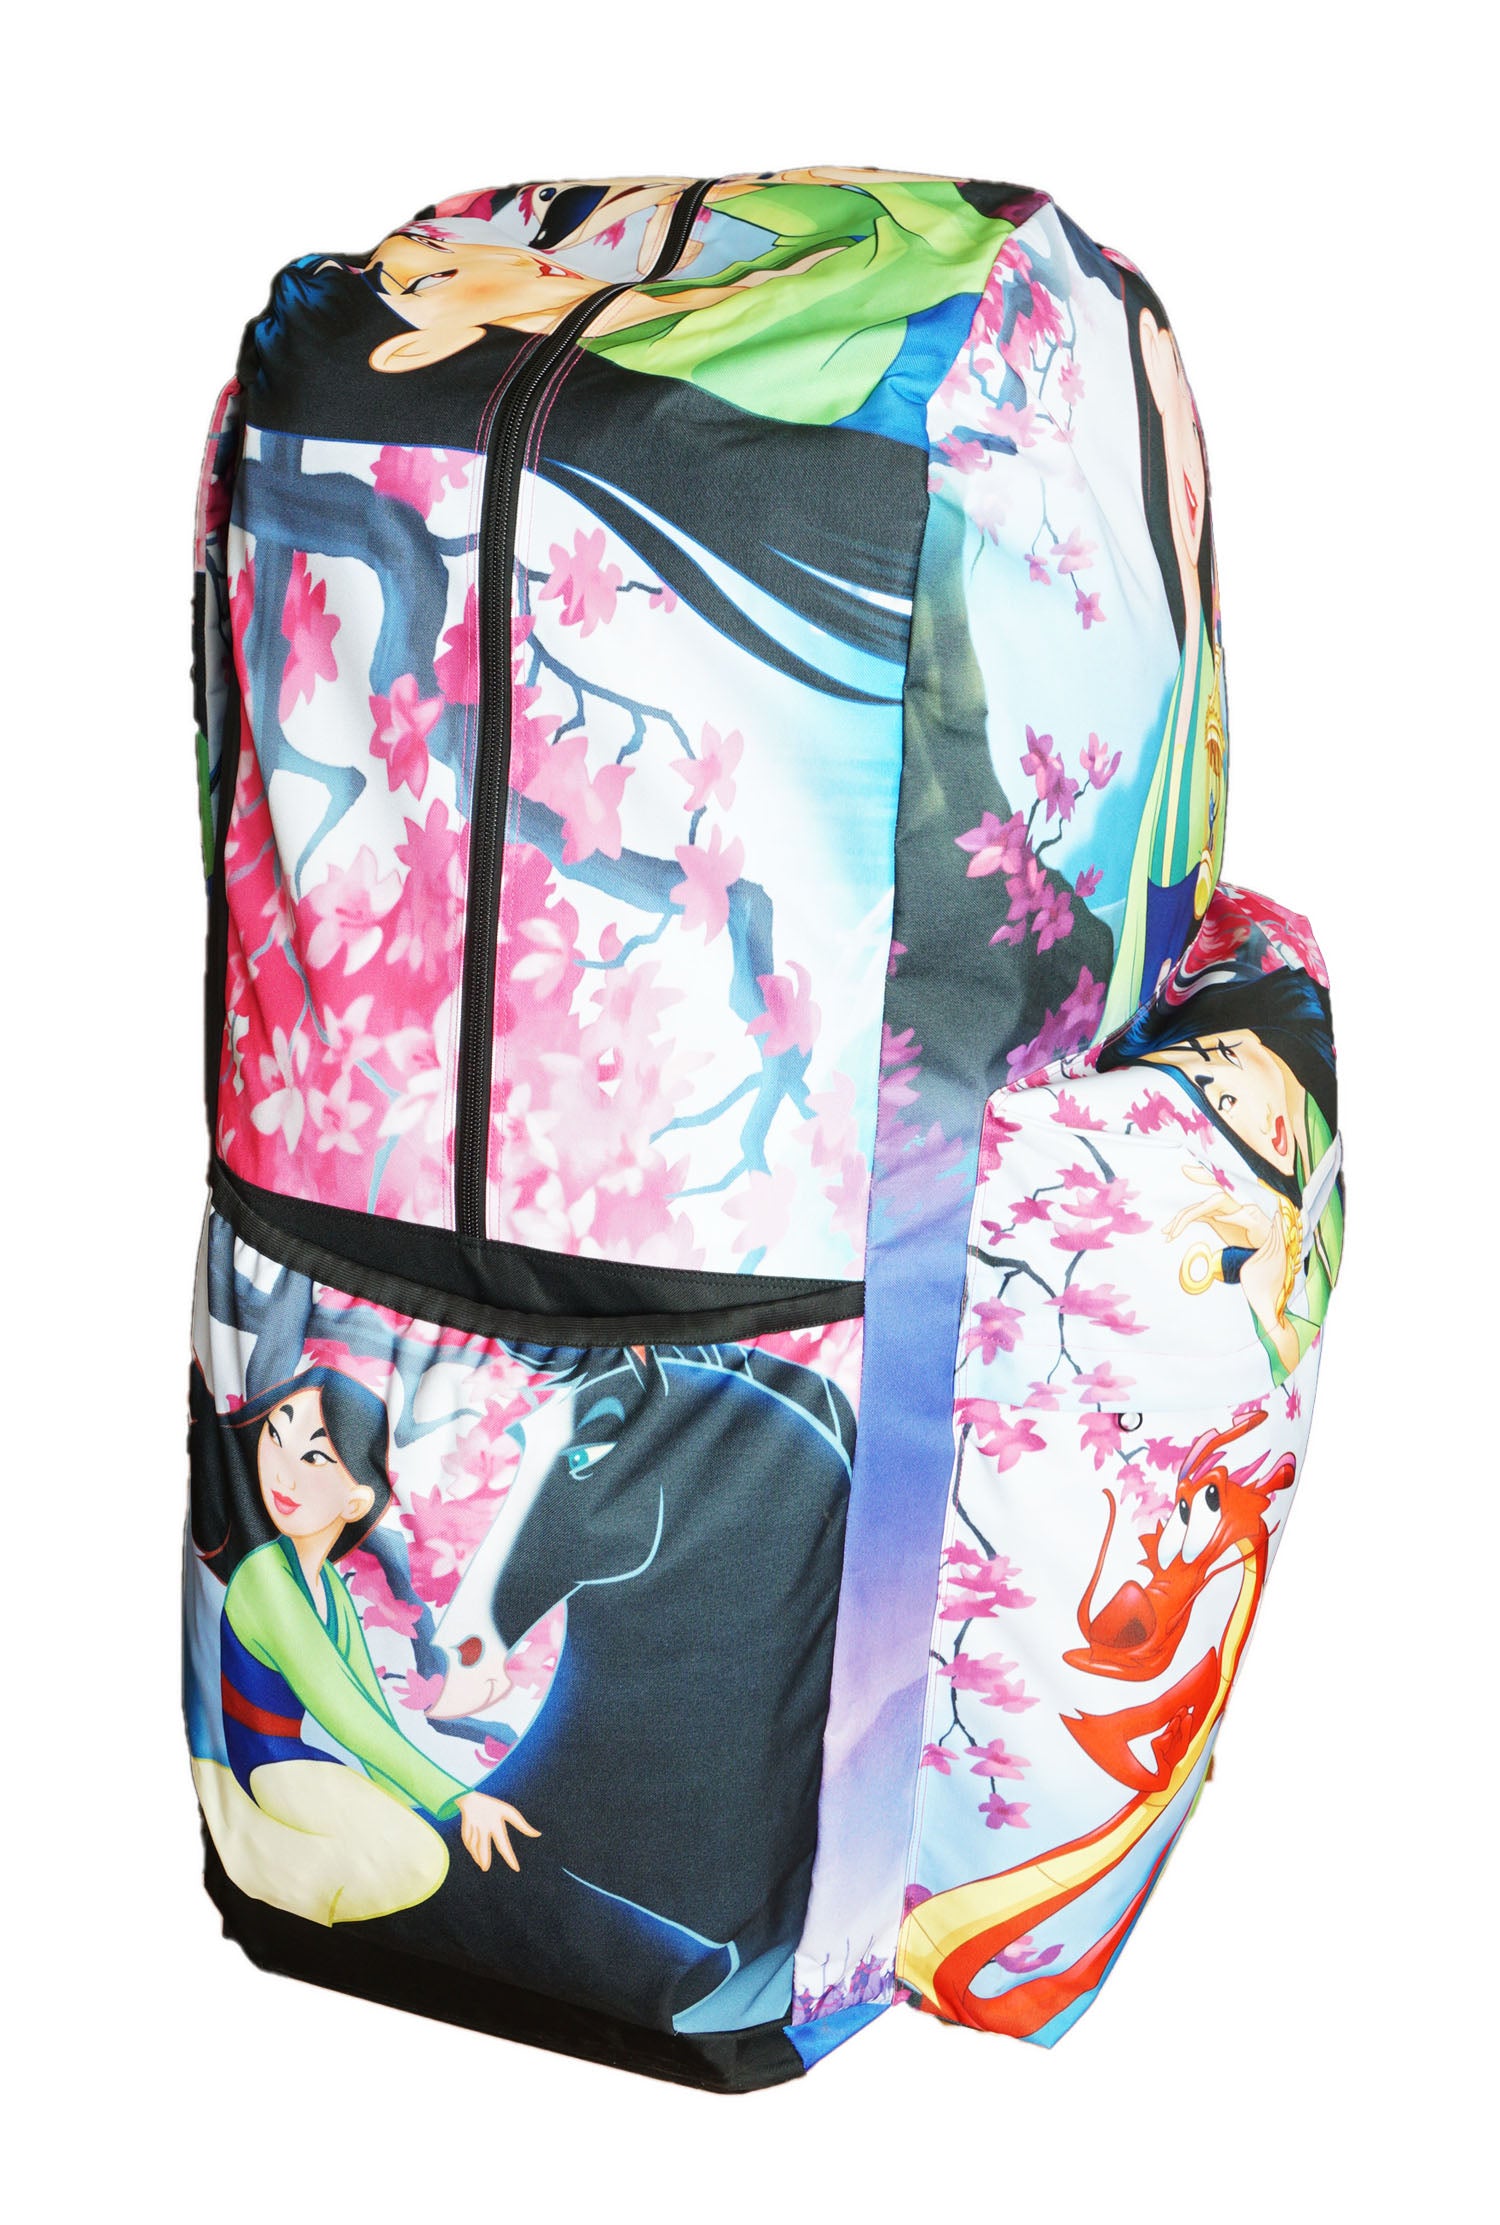 Disney Princess Mulan Deluxe Oversize Print Large 16" Backpack with Laptop Compartment - GTE Zone